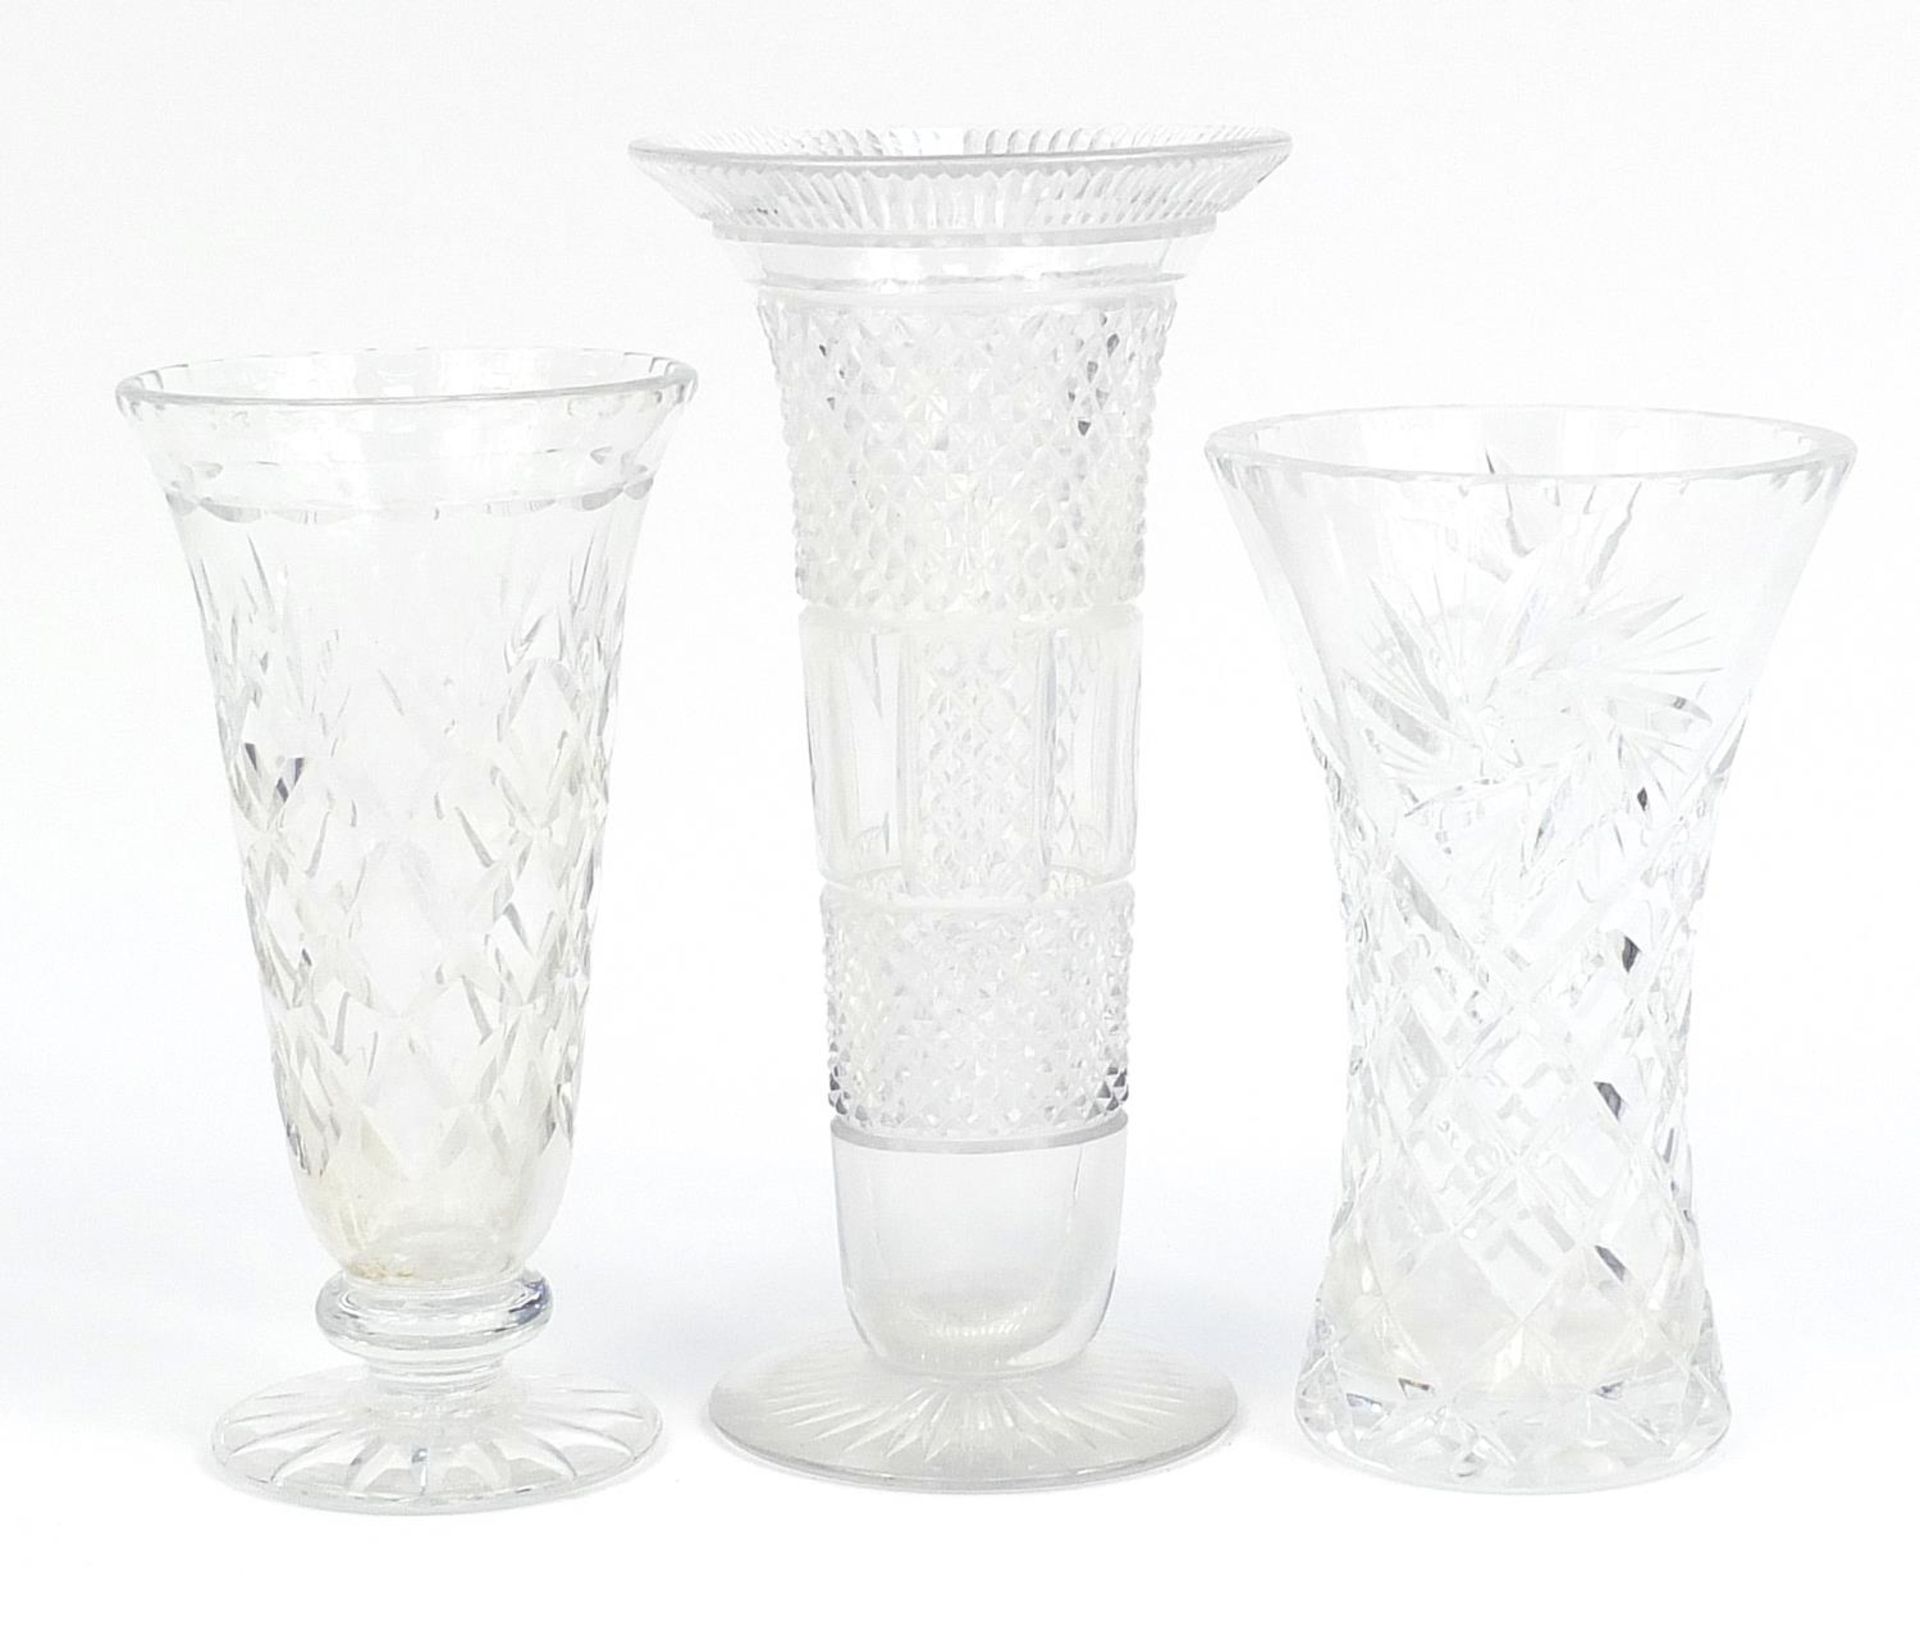 Three cut glass vases, the largest 26cm high - Image 2 of 3